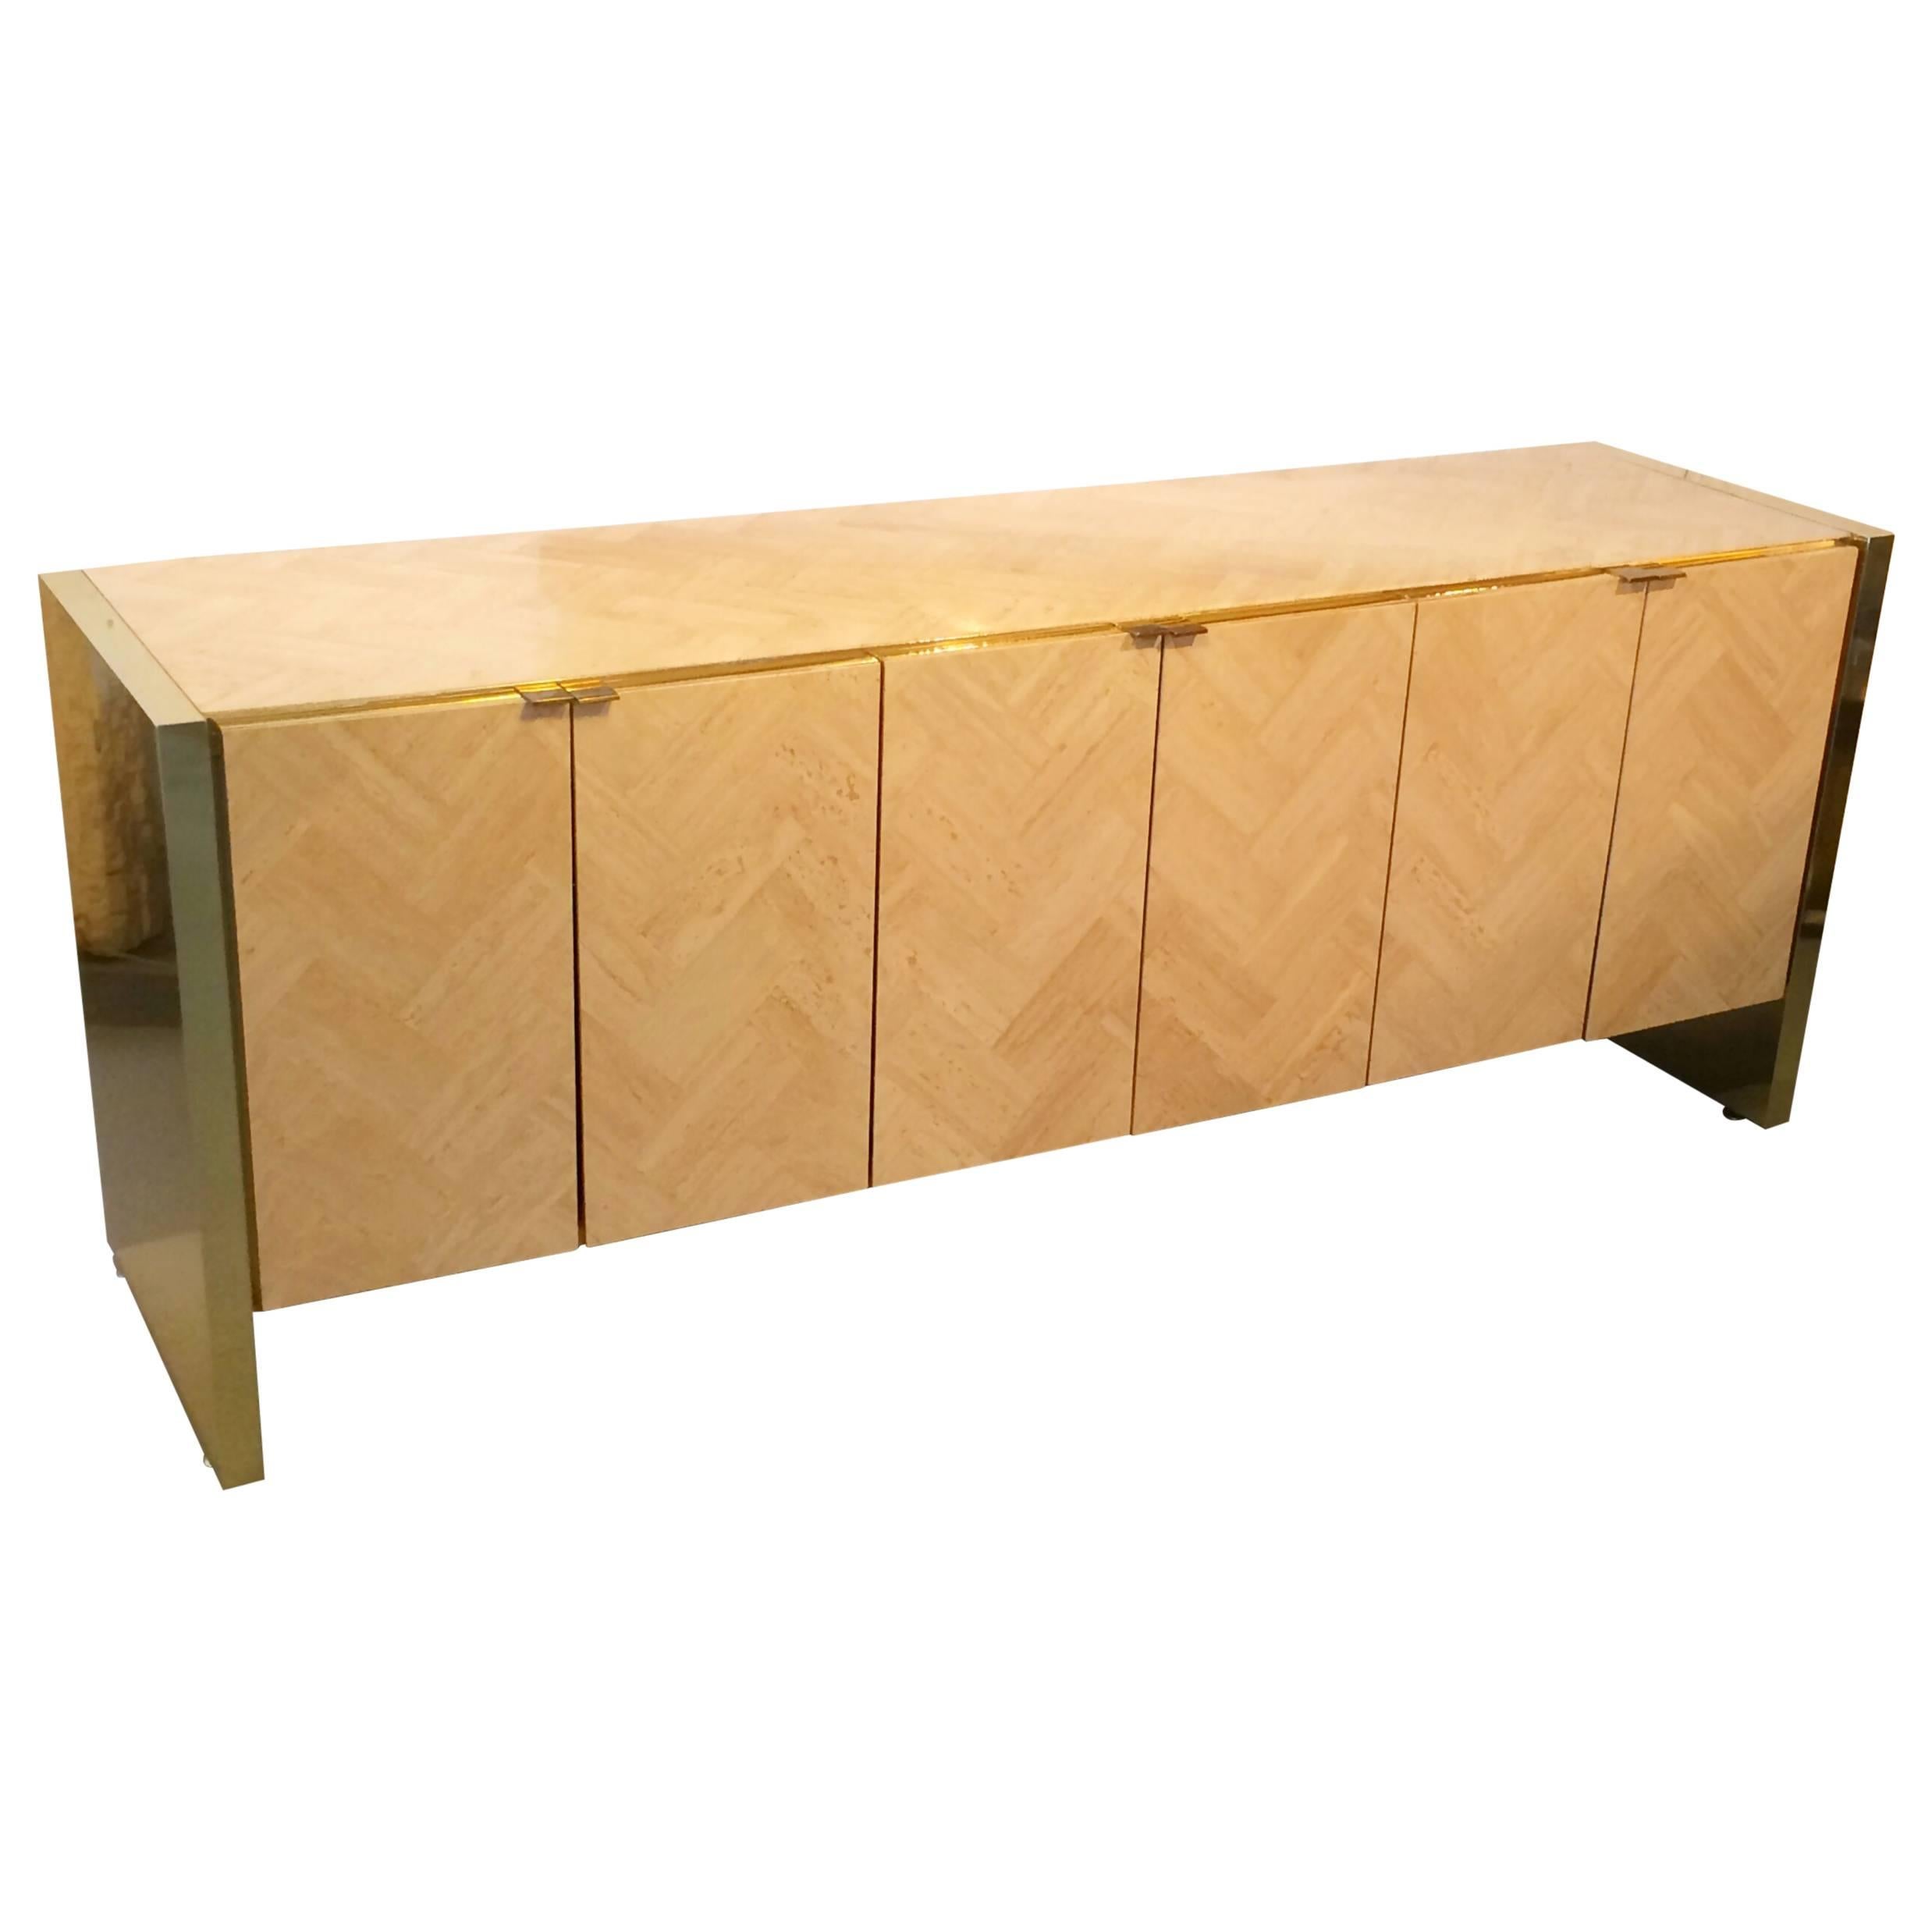 Italian Polished Travertine and Brass Cabinet by Ello